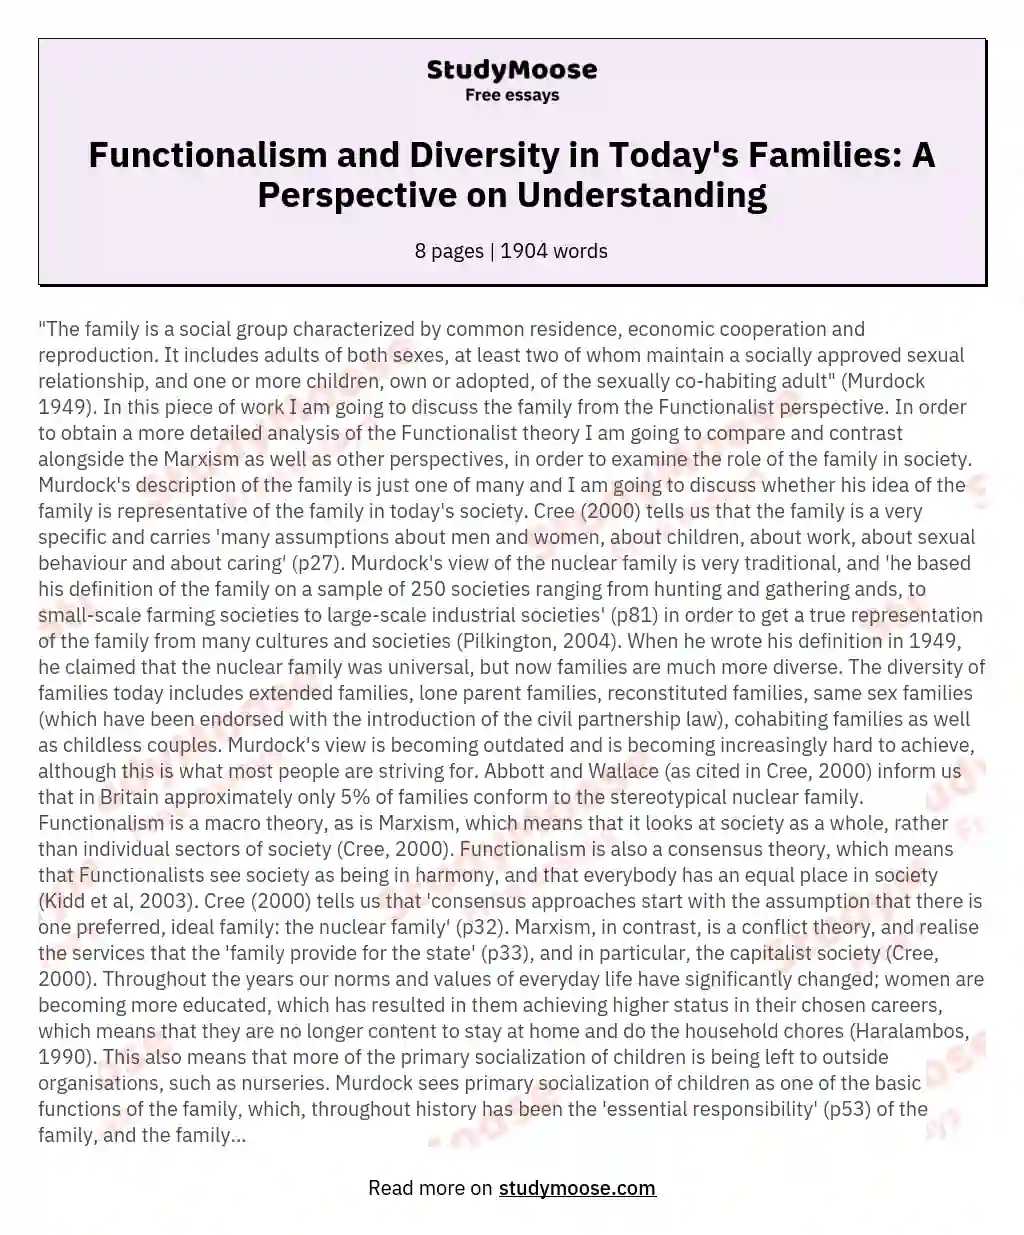 With reference to the family, consider how functionalist perspective enhances understanding of the diversity of family in today's society